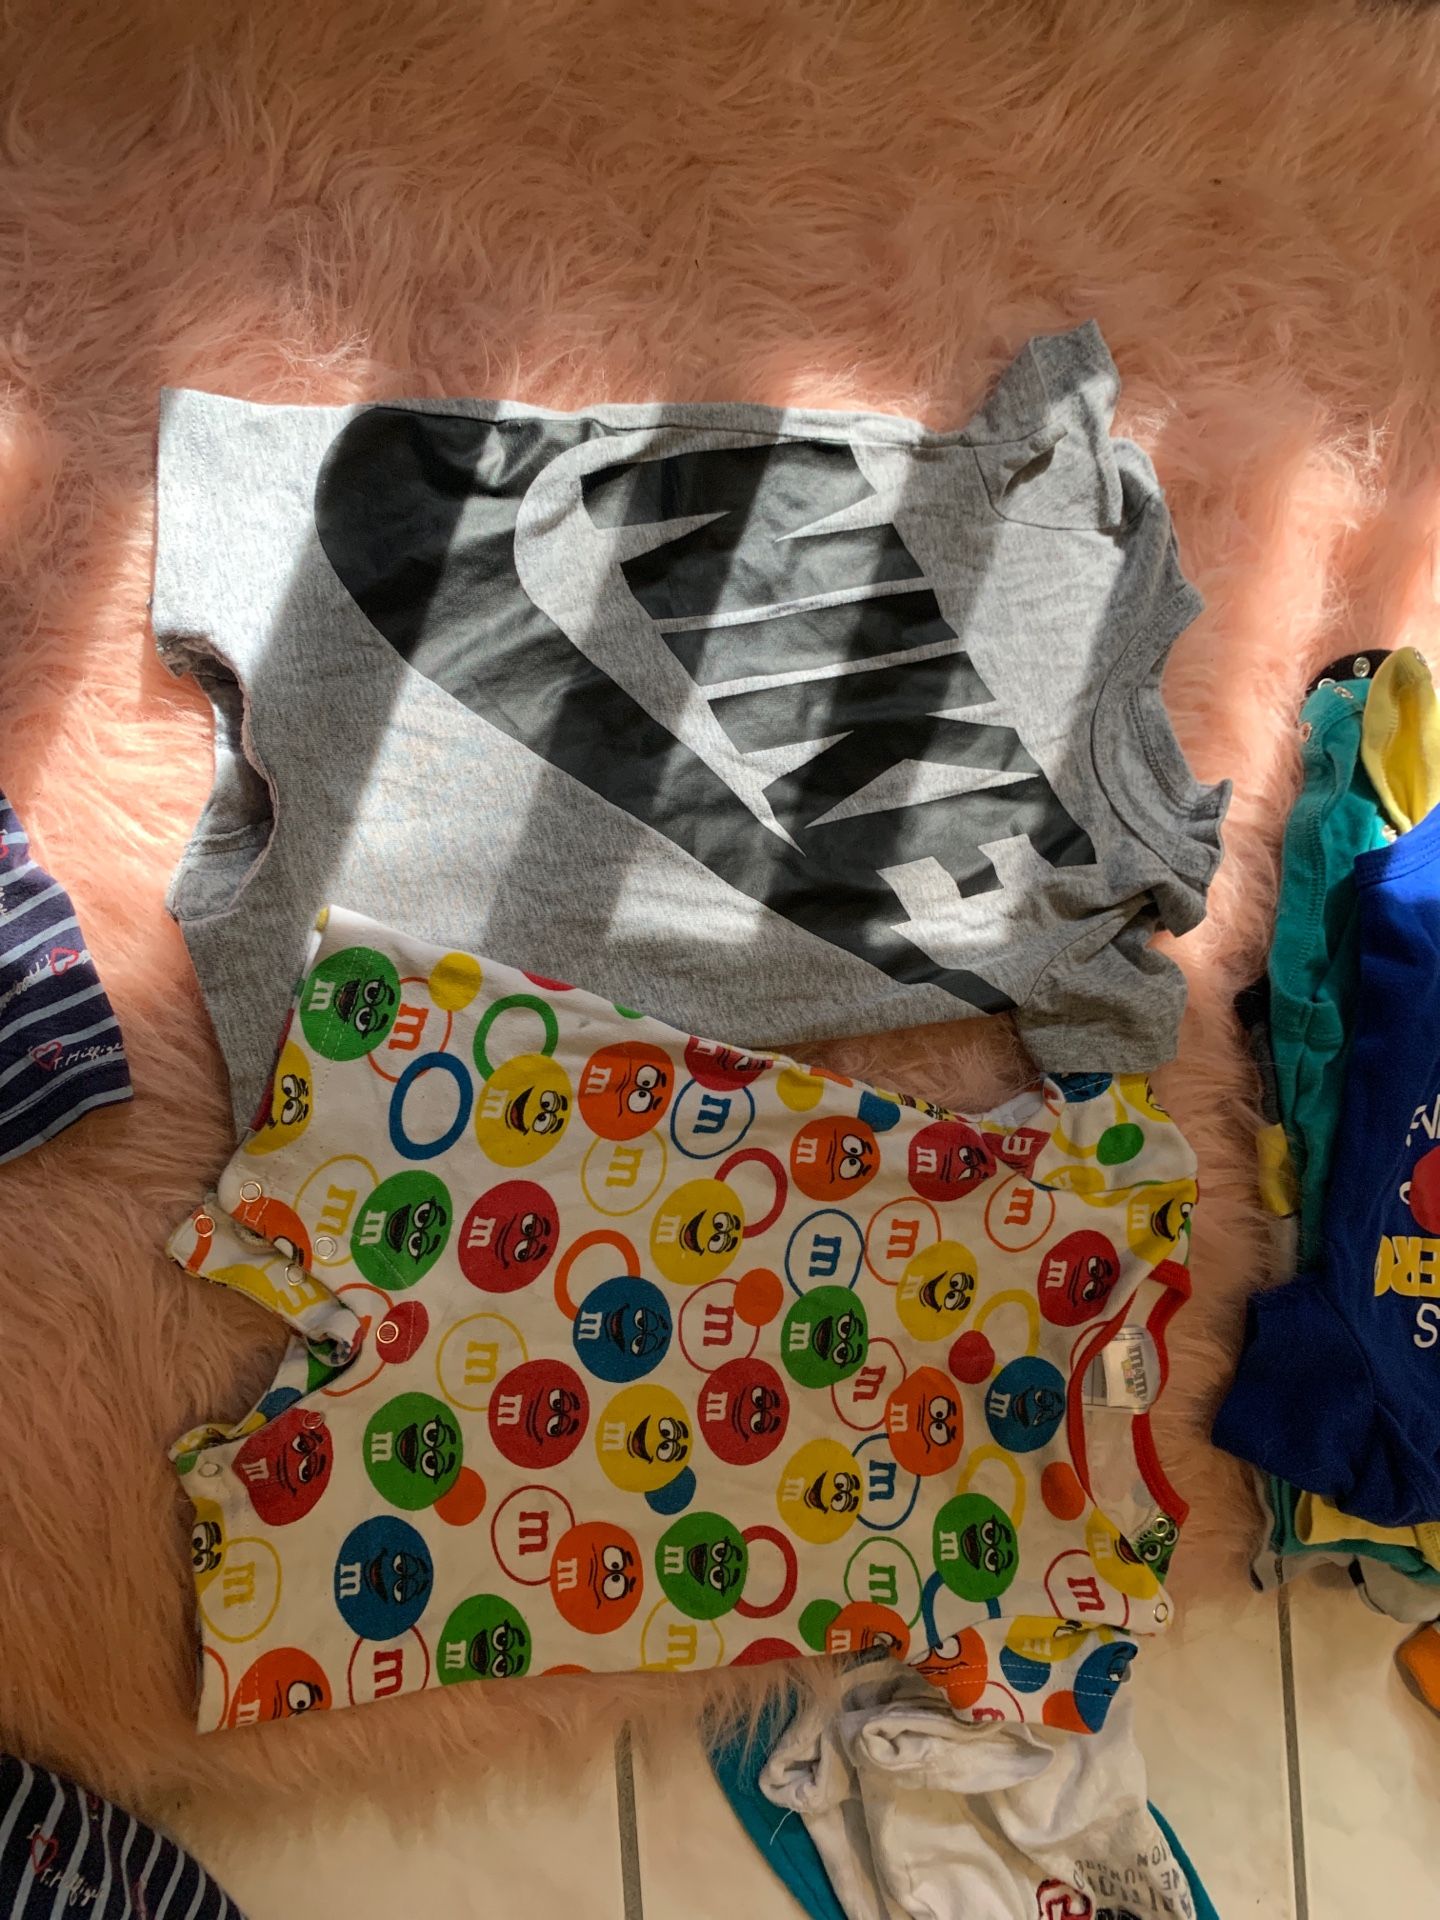 Nike and M&M onesies asking $6 for both great condition